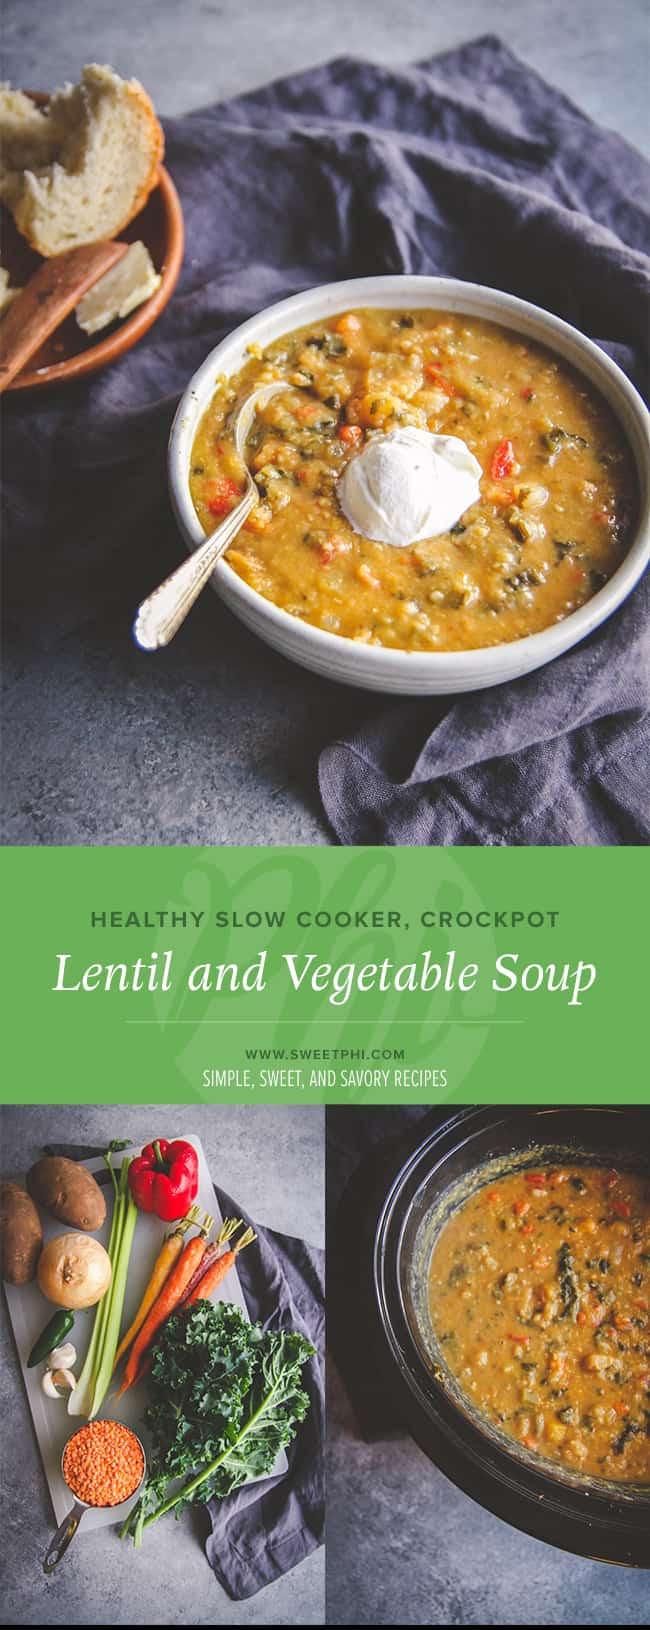 Slow Cooker Vegetable Soup Recipes Healthy
 Healthy Slow Cooker Lentil and Ve able Soup Sweetphi